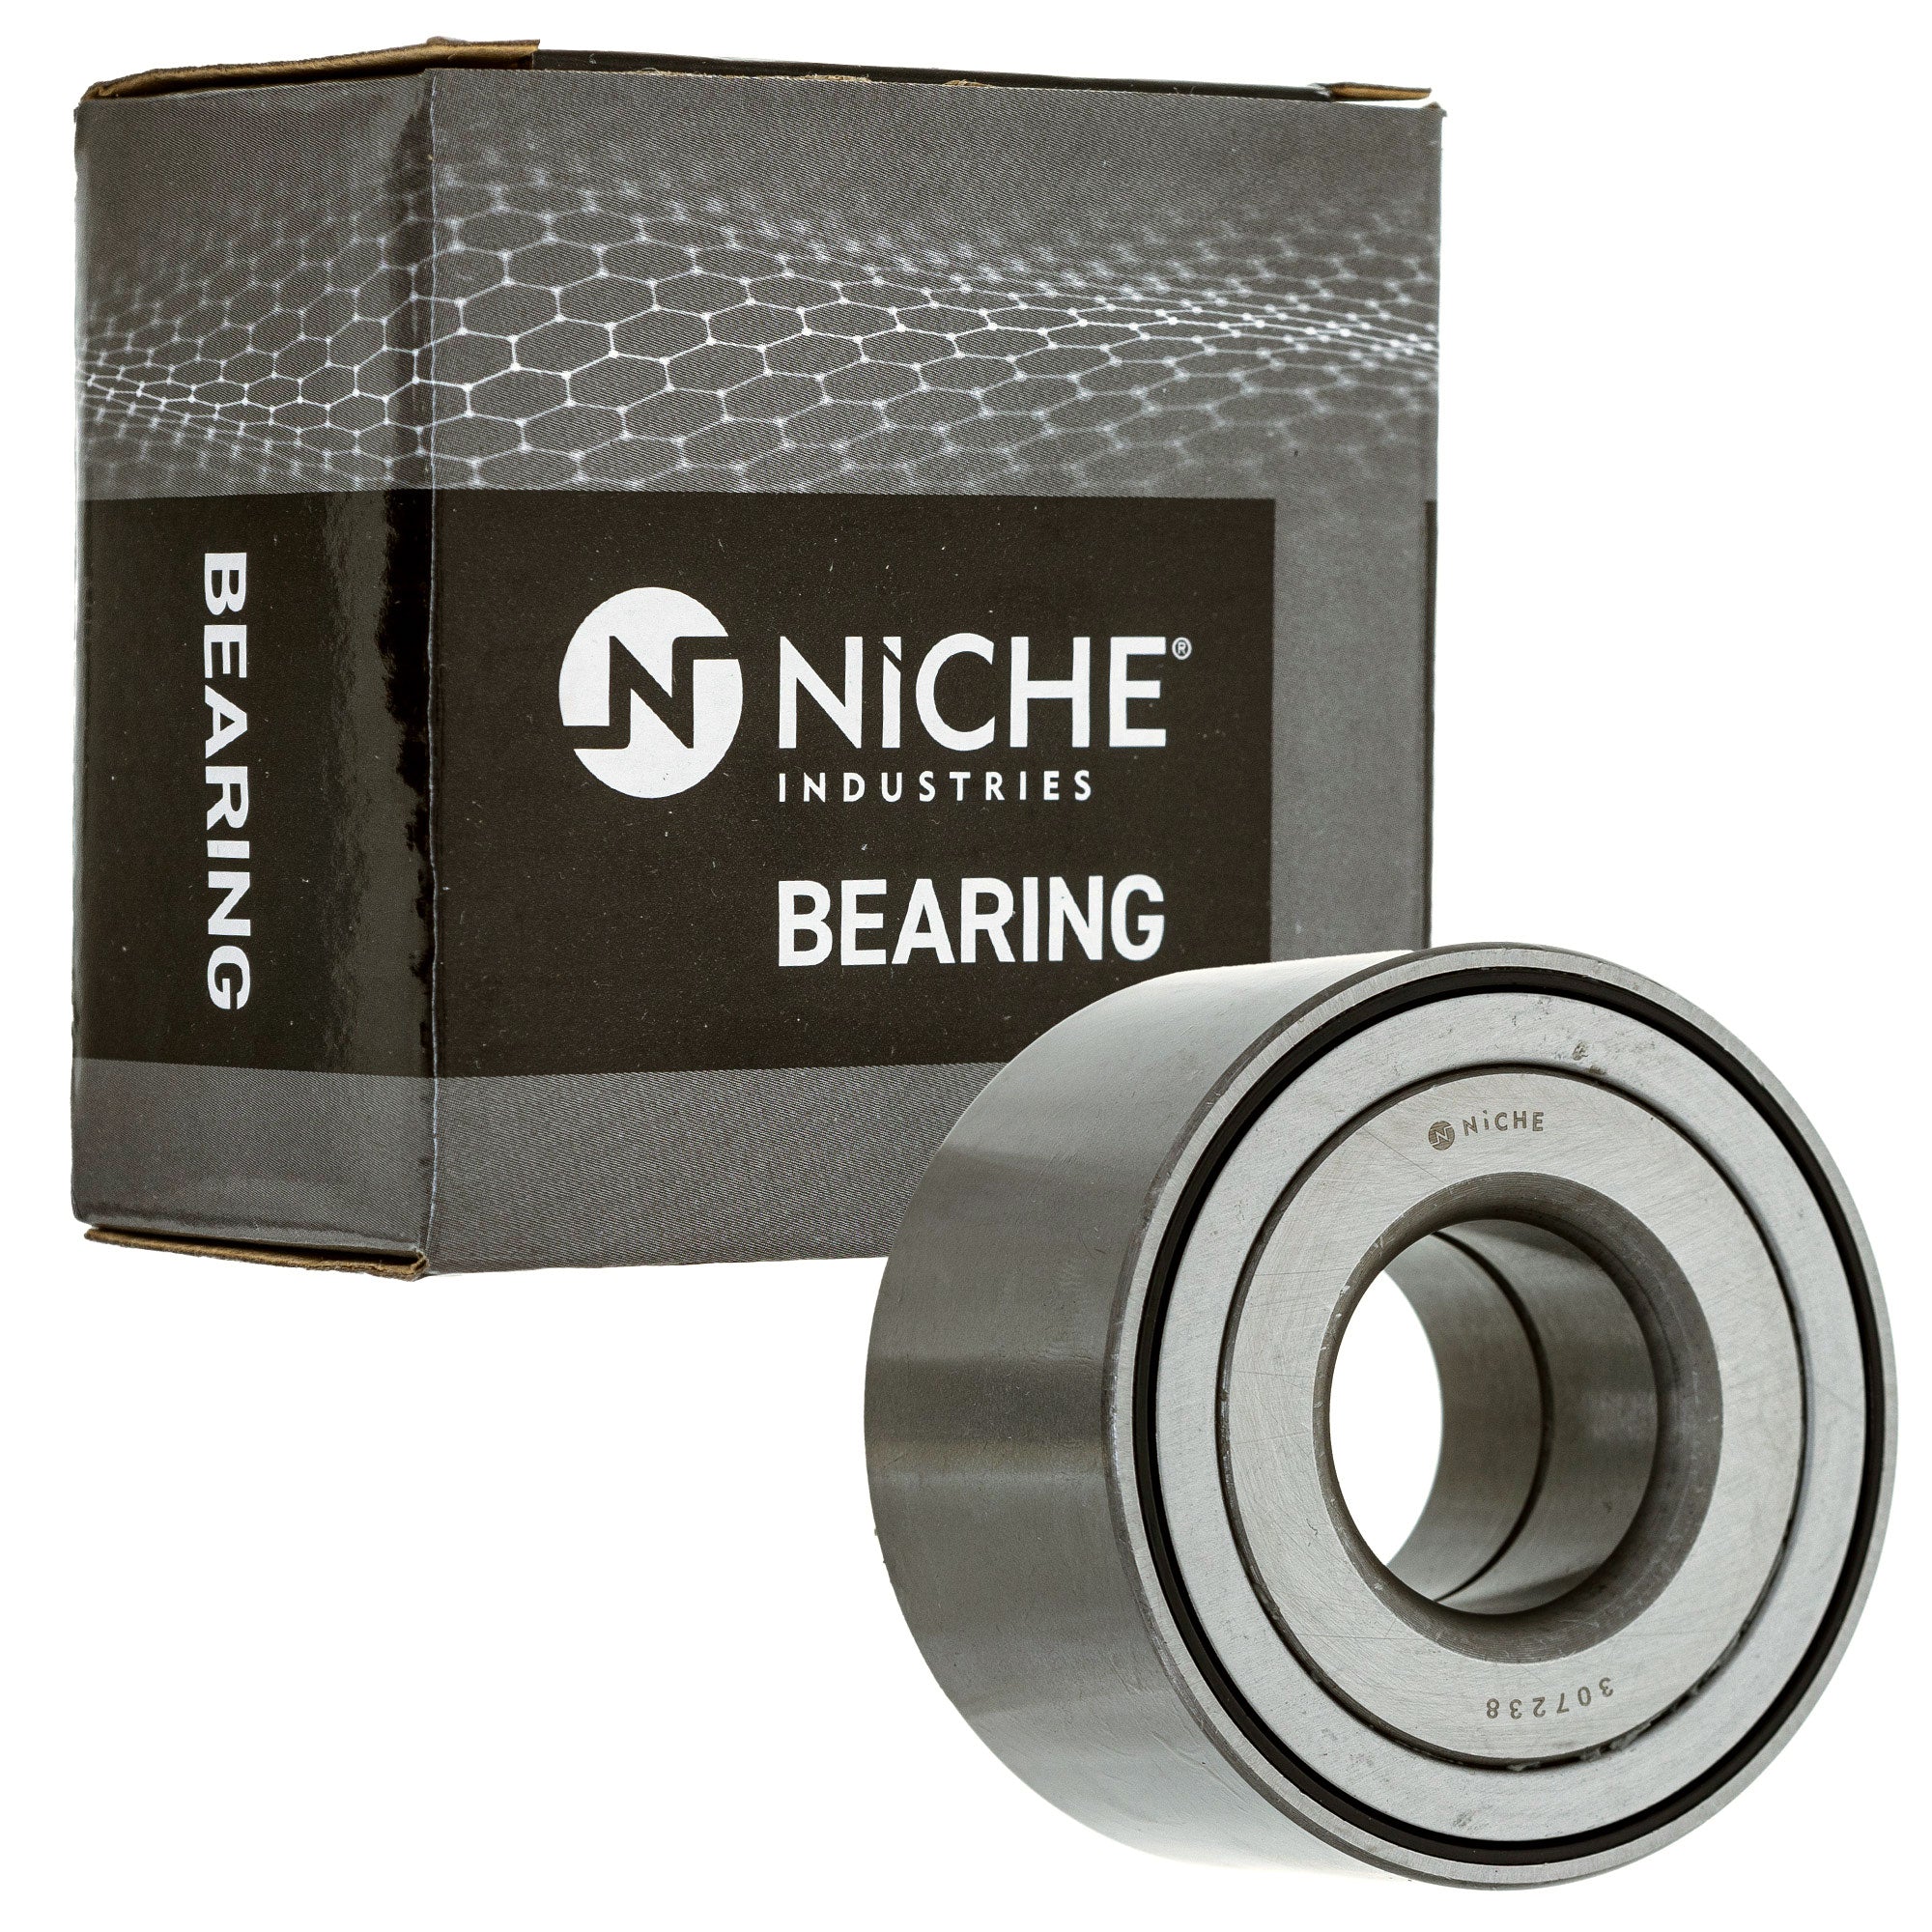 NICHE 519-CBB2219R Bearing 10-Pack for zOTHER YXZ1000R